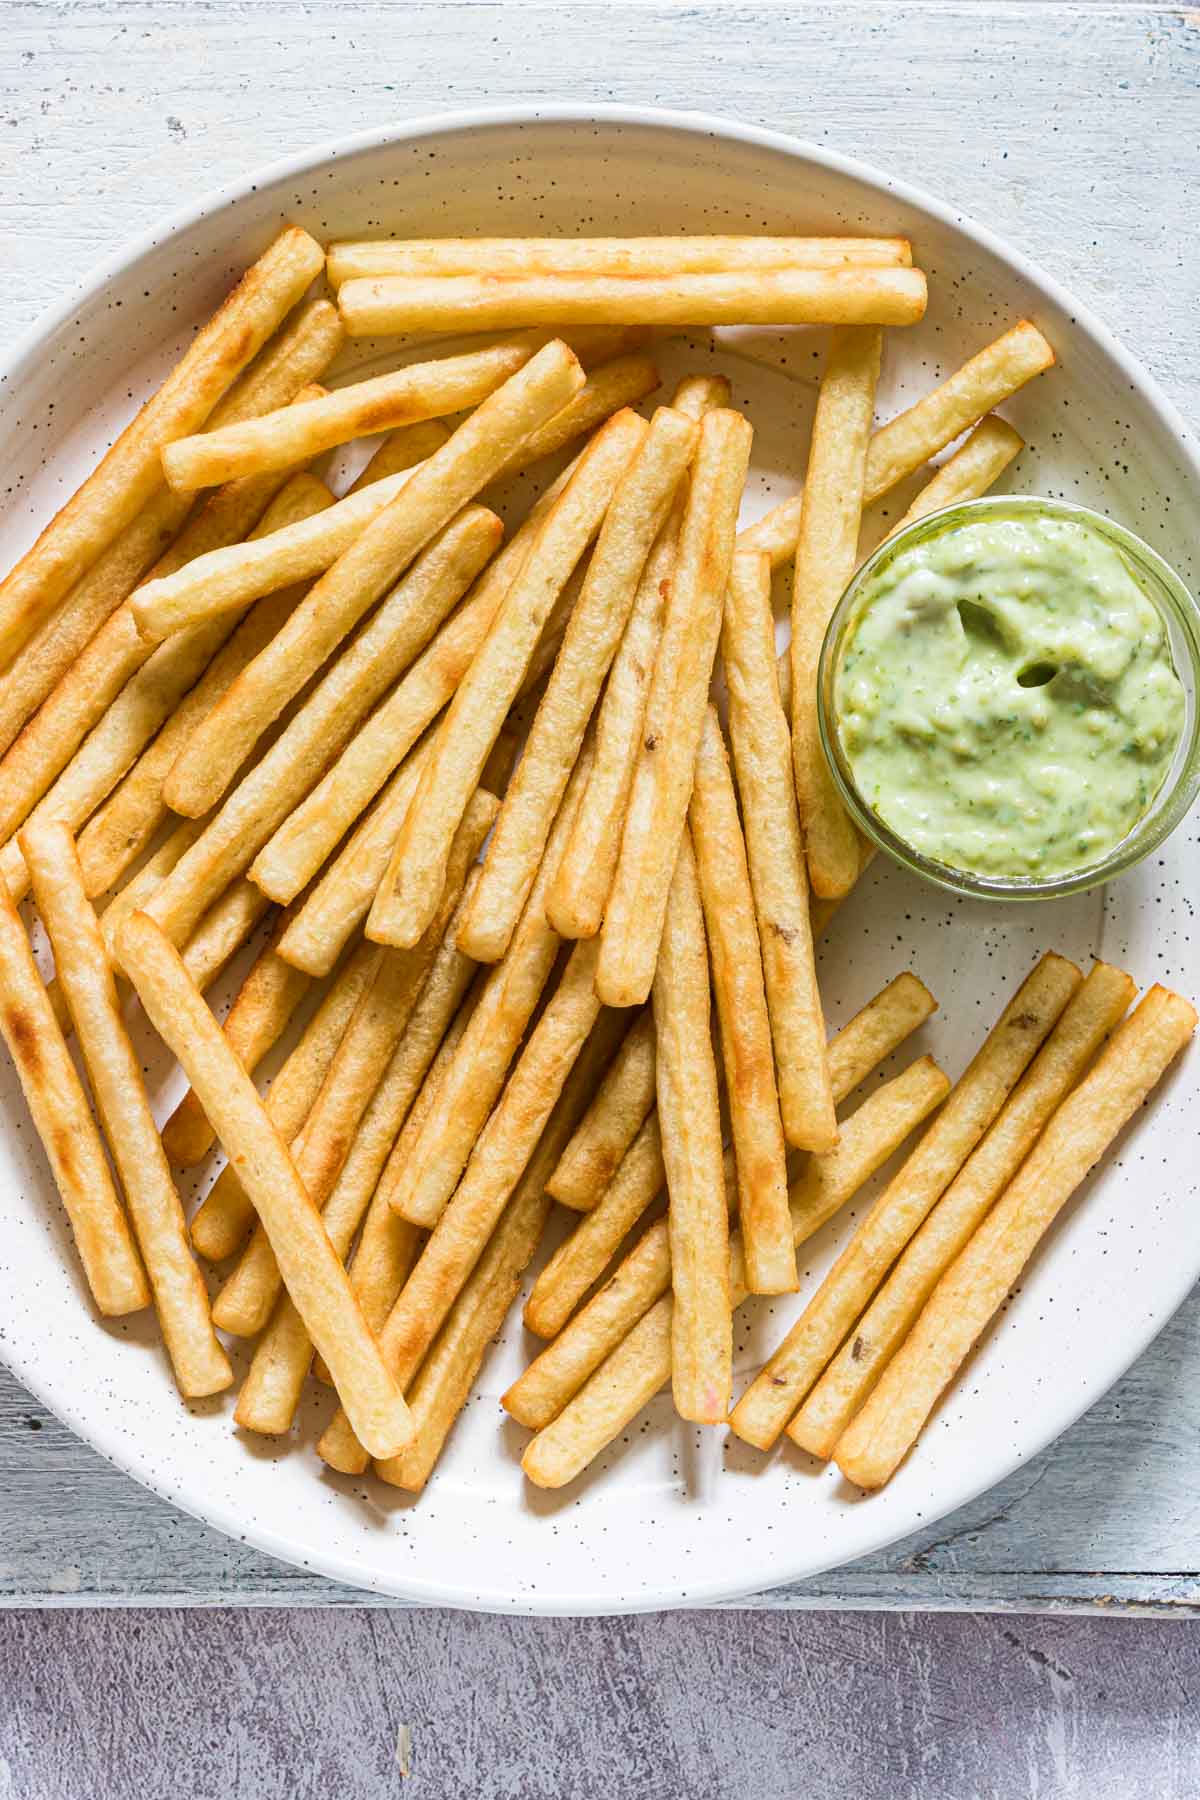 french fries served with the basil pesto aioli dipping sauce